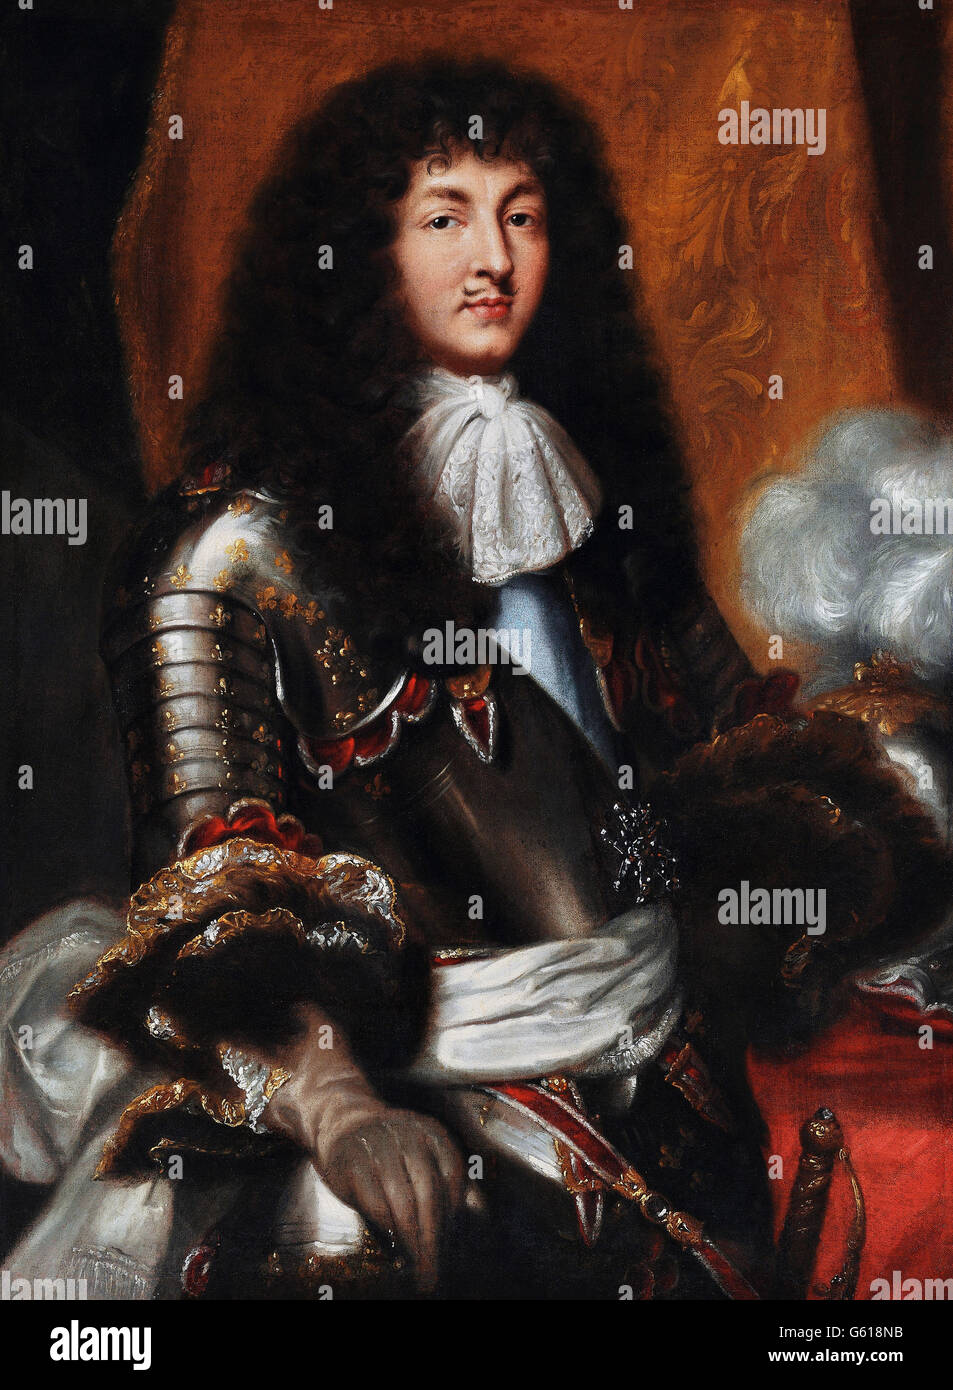 Louis XIV. Portrait of King Louis XIV of France (1638-1715) in Stock Photo, Royalty Free Image ...